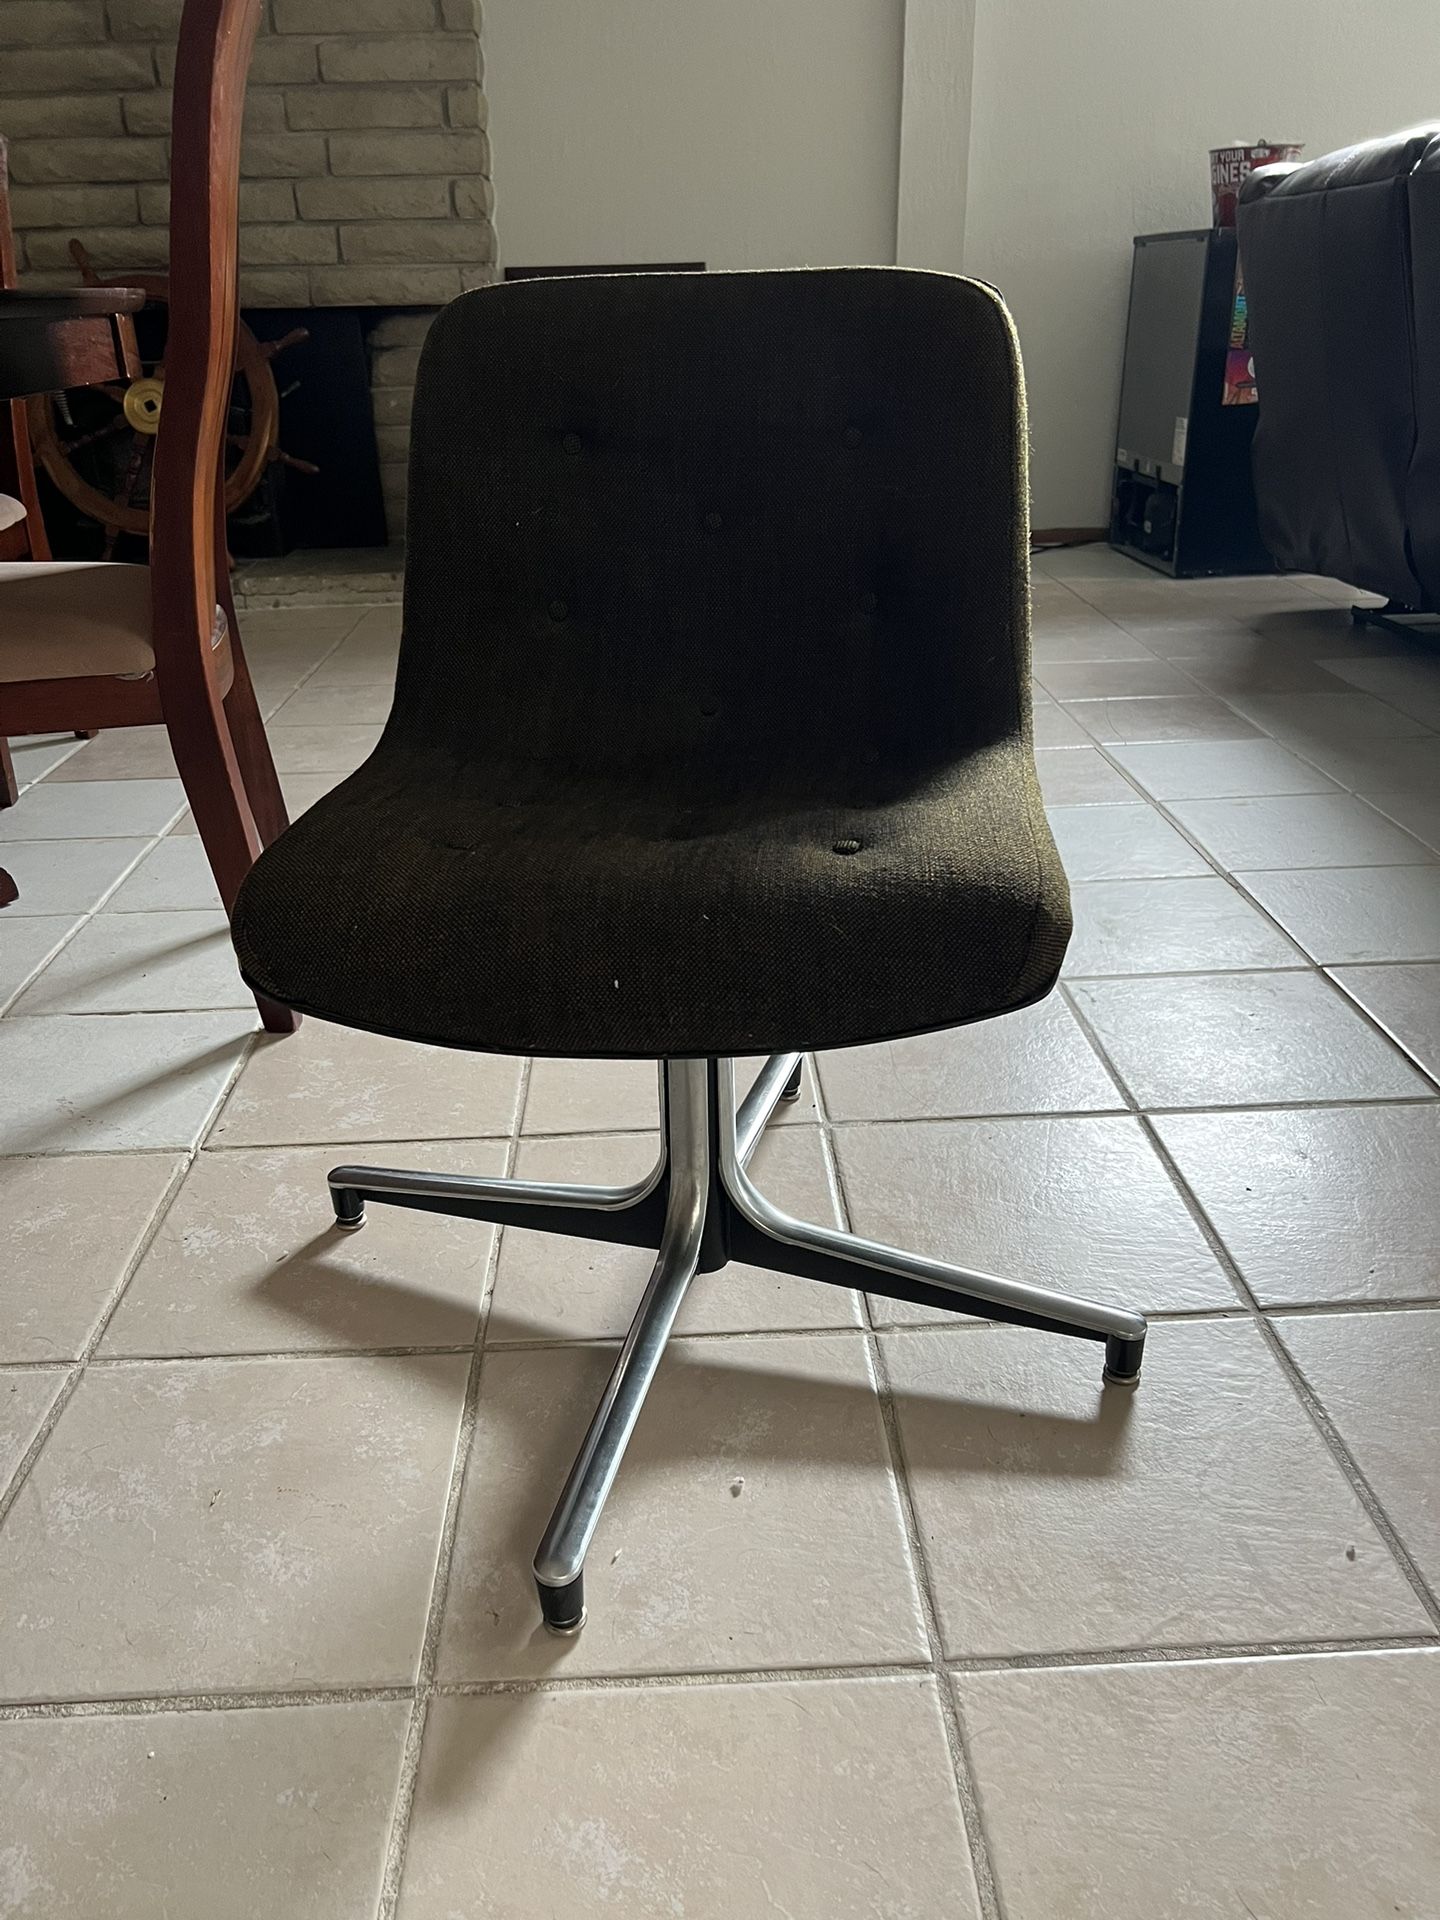 Cool Vintage office chair